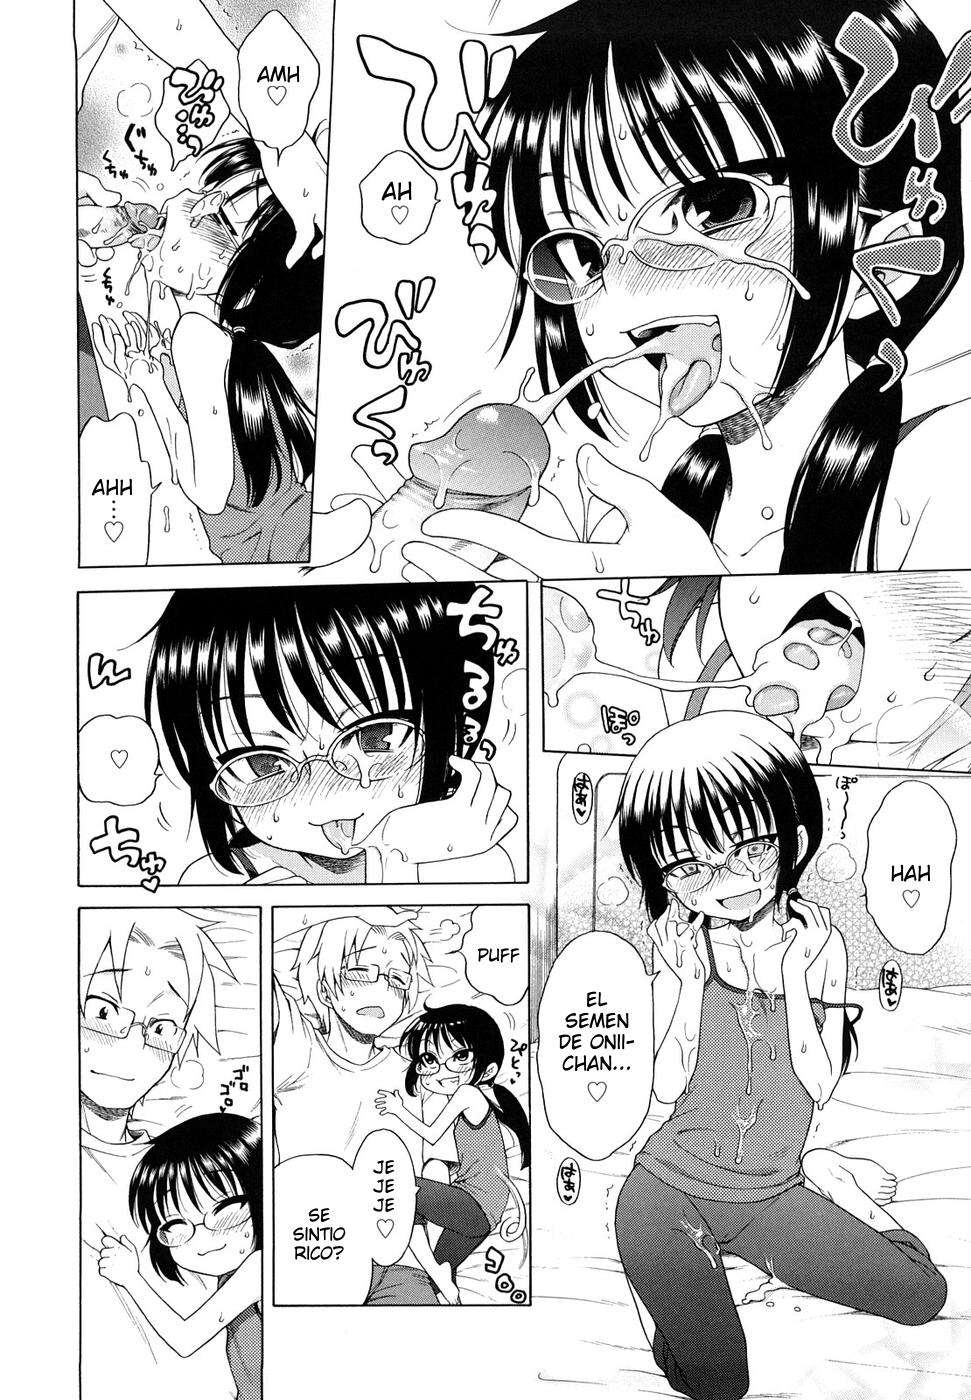 Onii-chan!! Me gustas.. Chapter-10 - 13